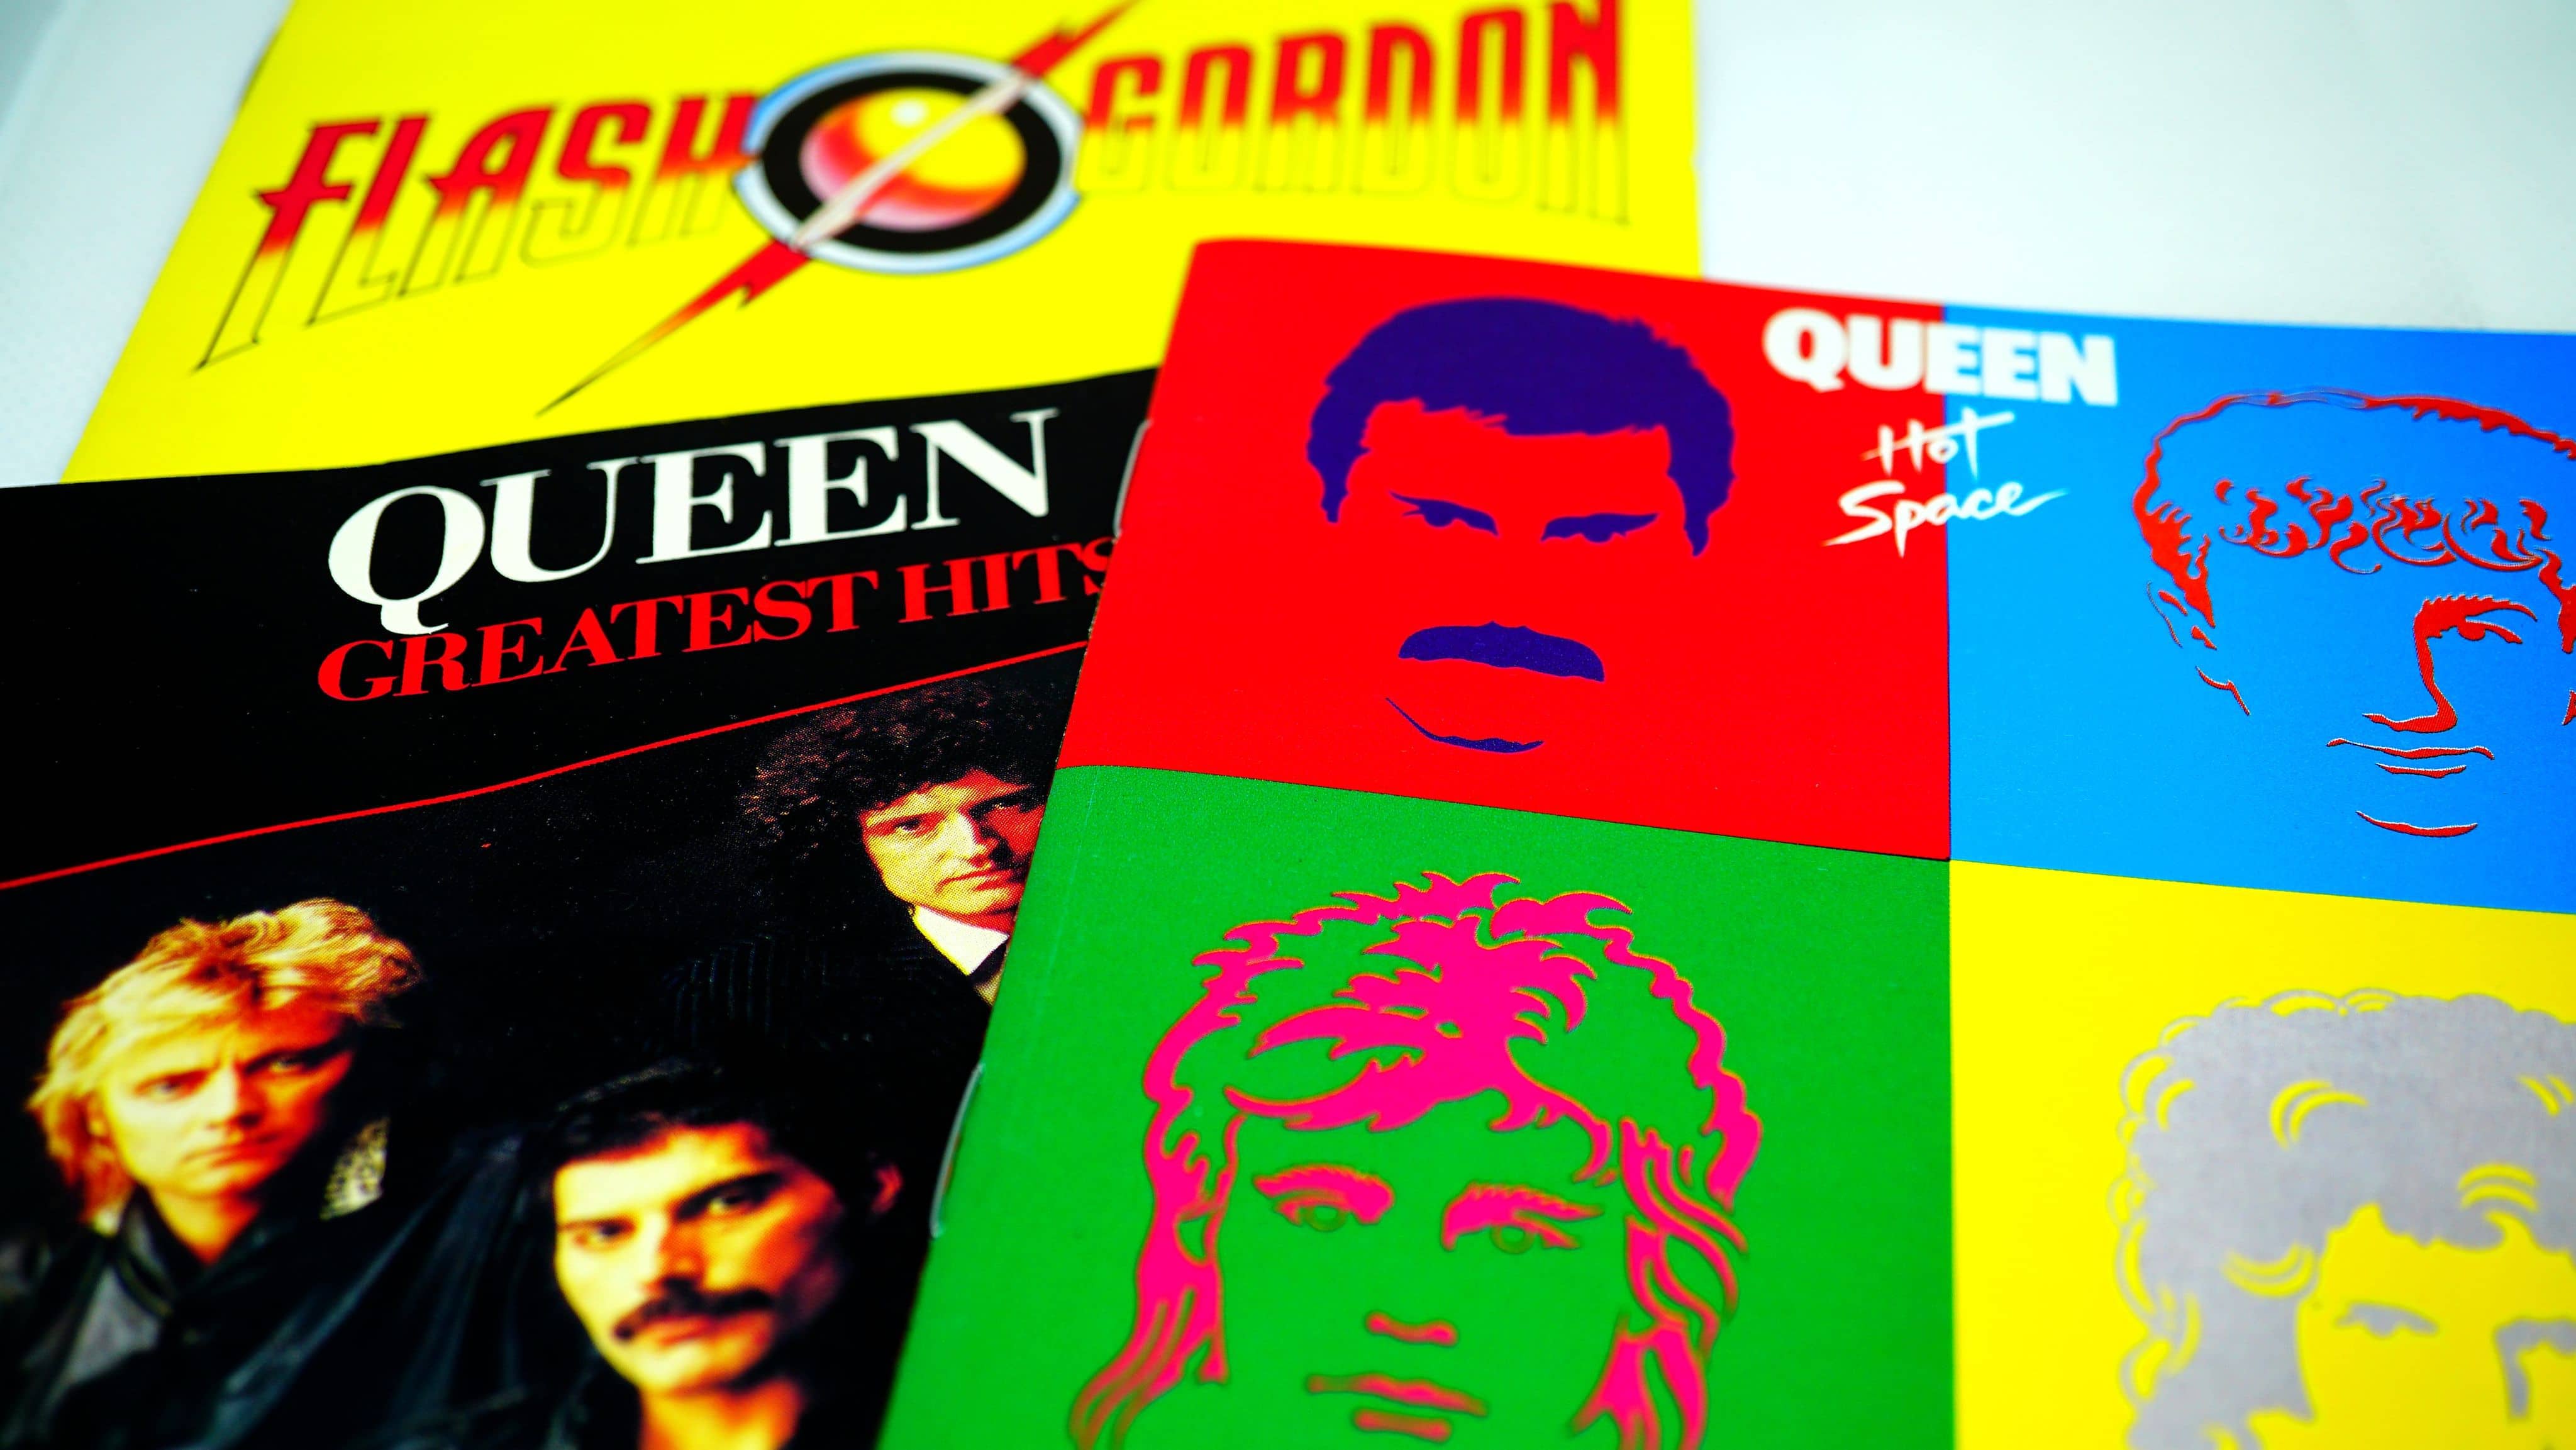 Queen - Face It Alone [7''] (with Freddie Mercury, limited) (recently – Hot  Tracks